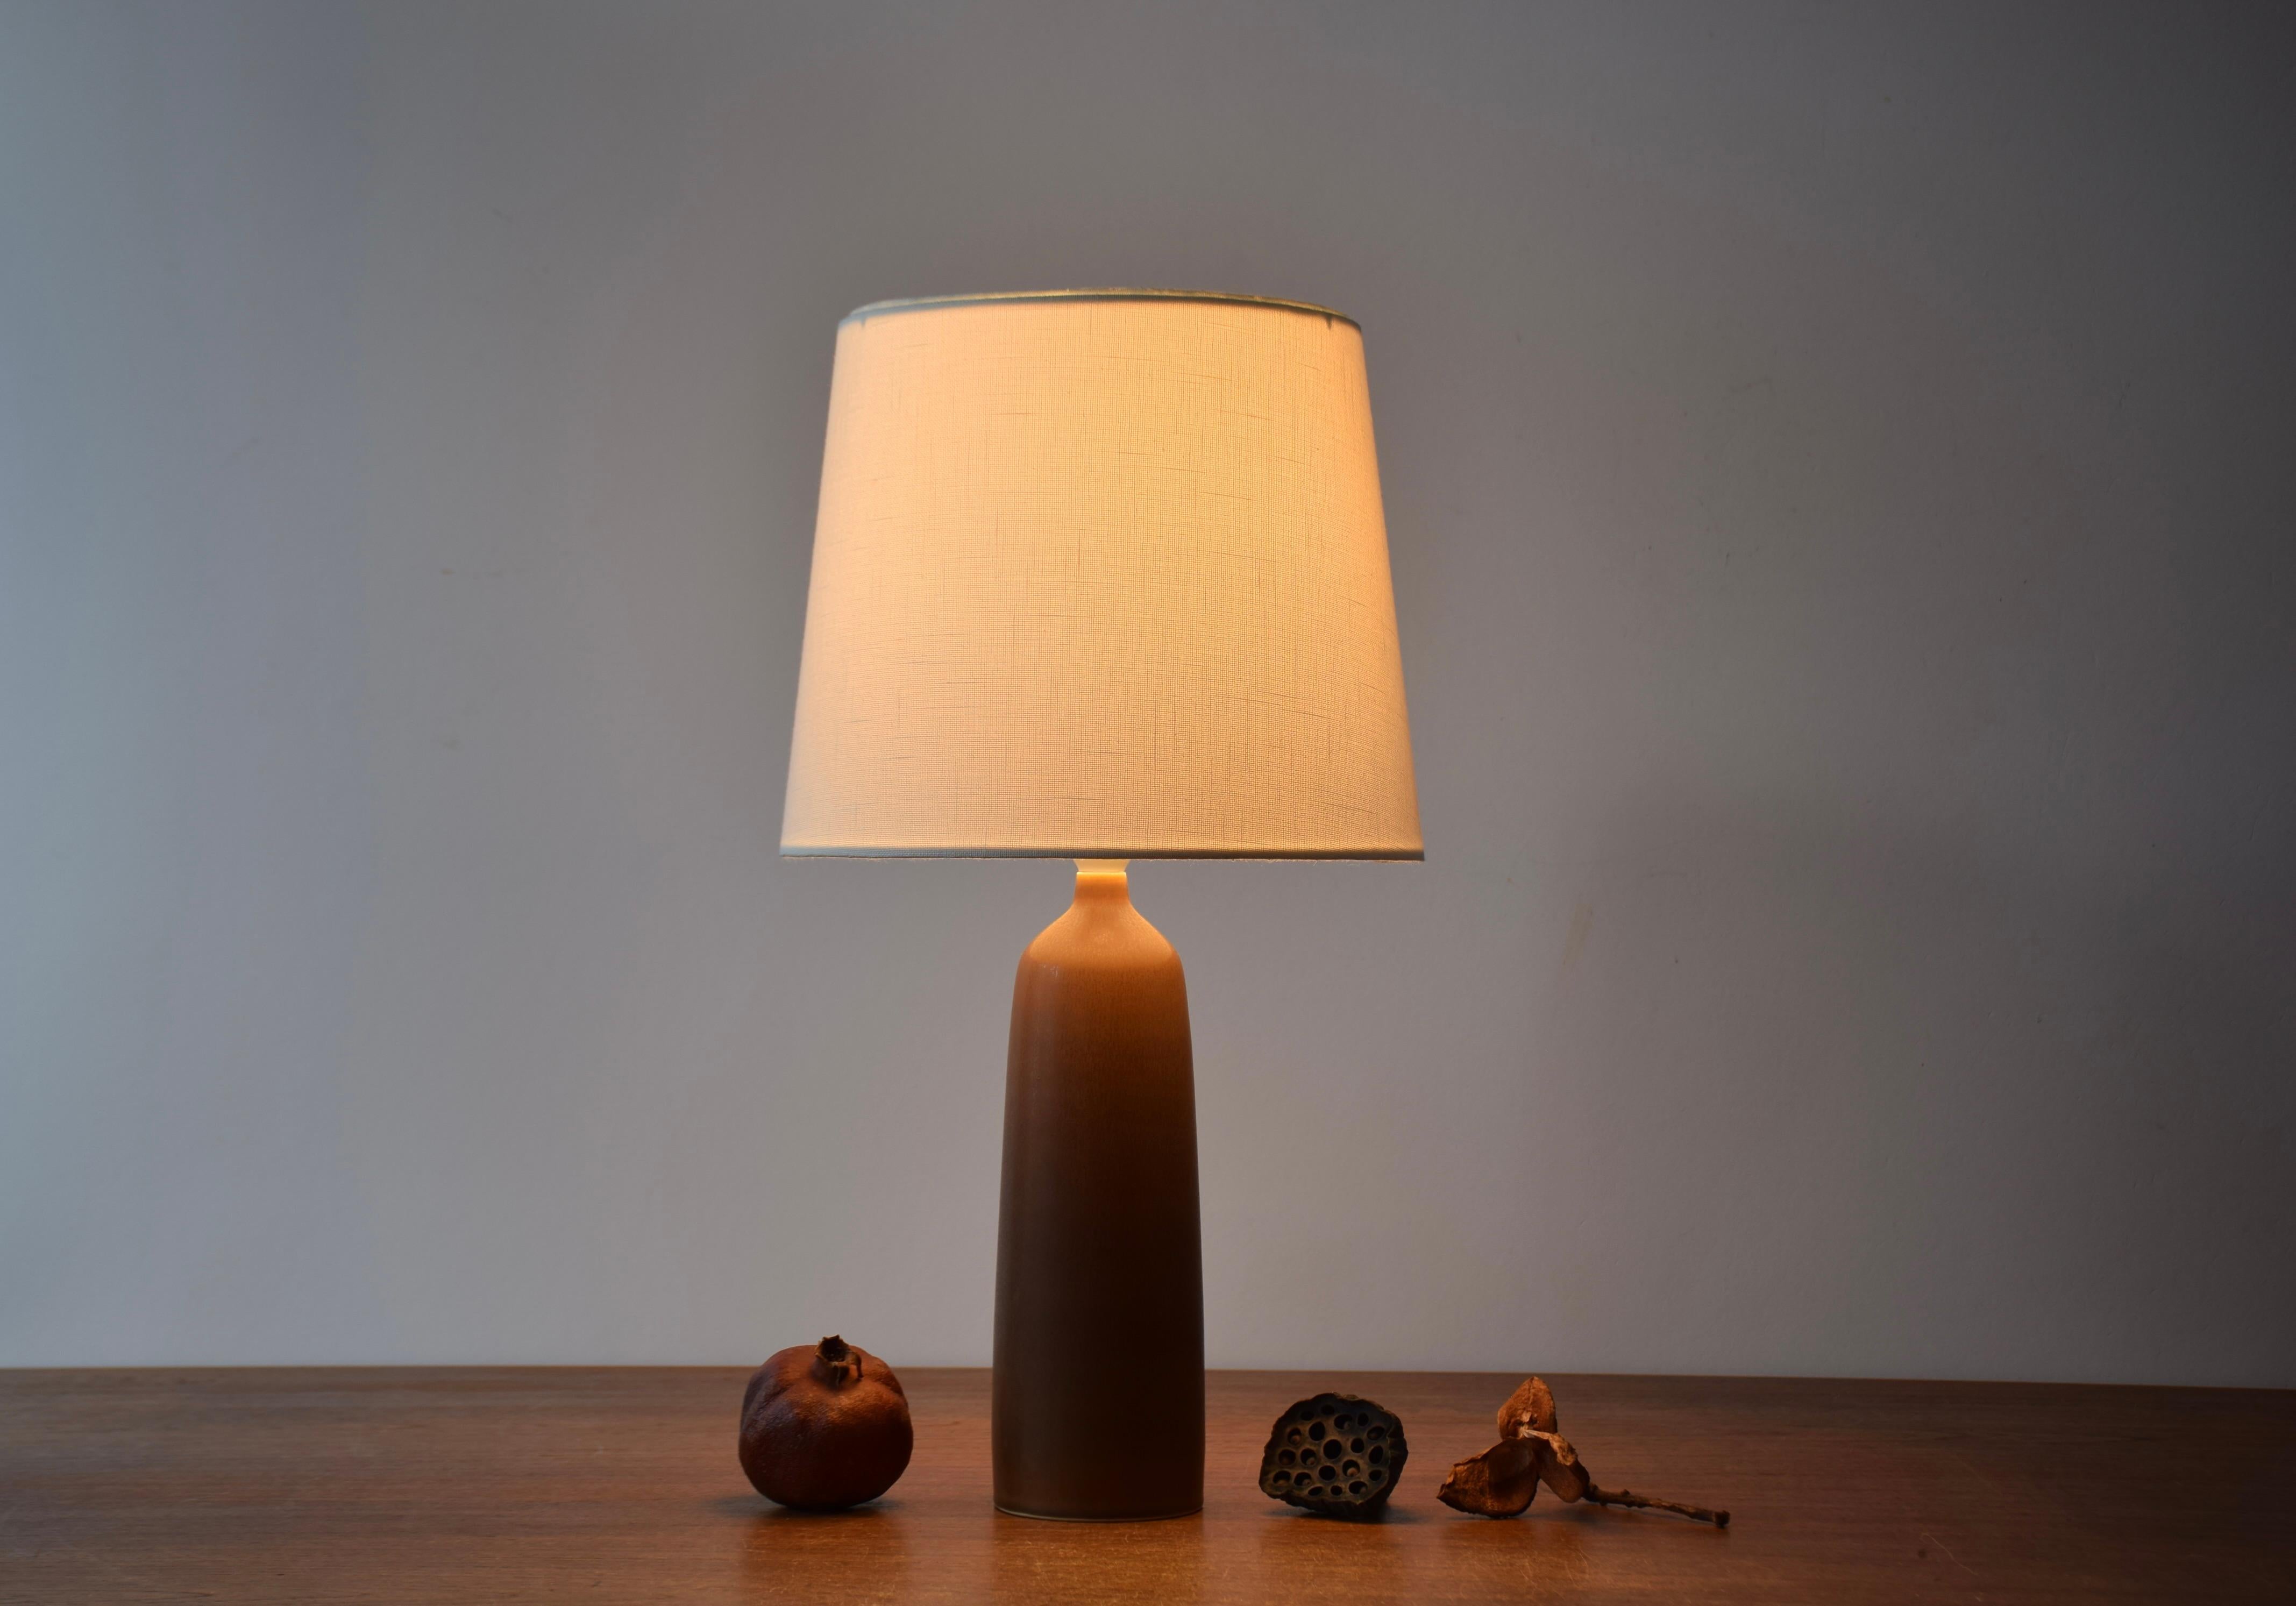 Midcentury table lamp from the Danish ceramic workshop Palshus.  
The lamp was designed by Per Linnemann-Schmidt and manufactured circa 1950s.

The lamp features a warm brown haresfur glaze on an elegant shape.

Included is a new lampshade designed